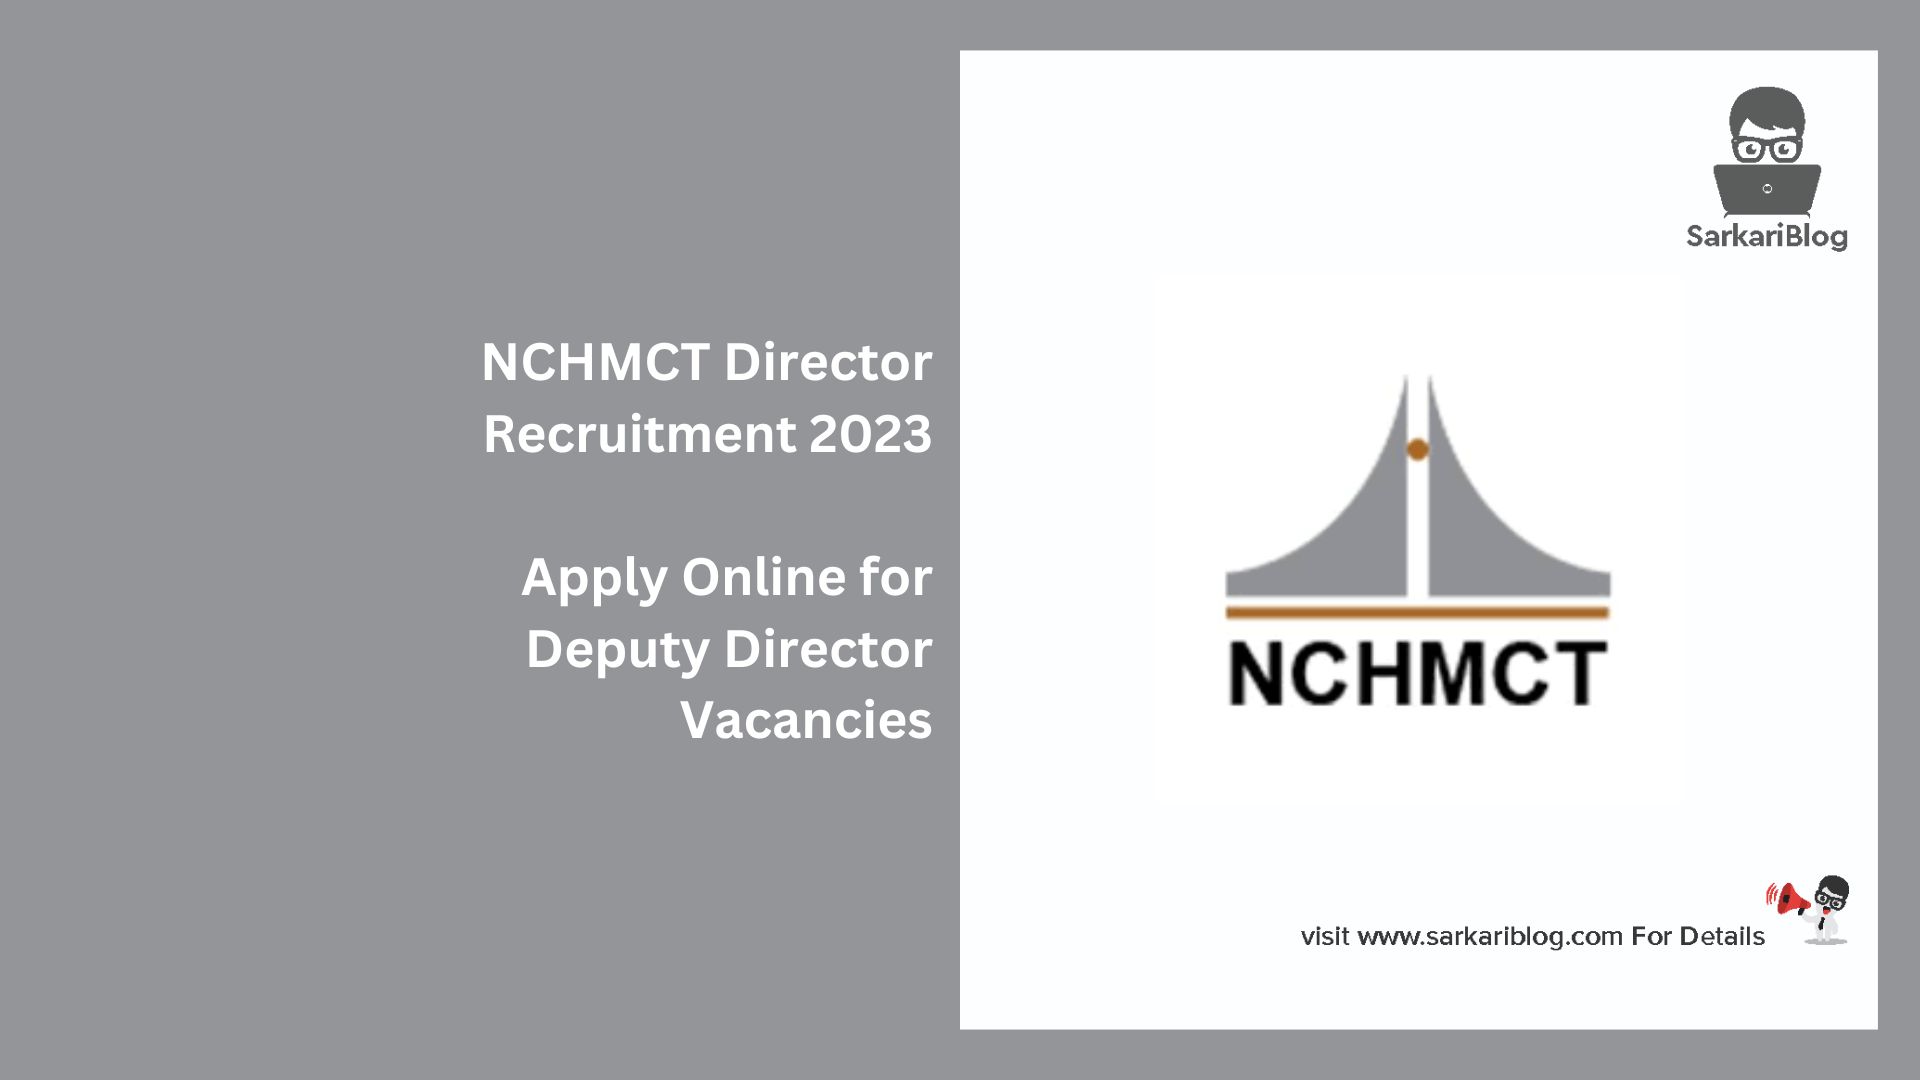 NCHMCT Director Recruitment 2023